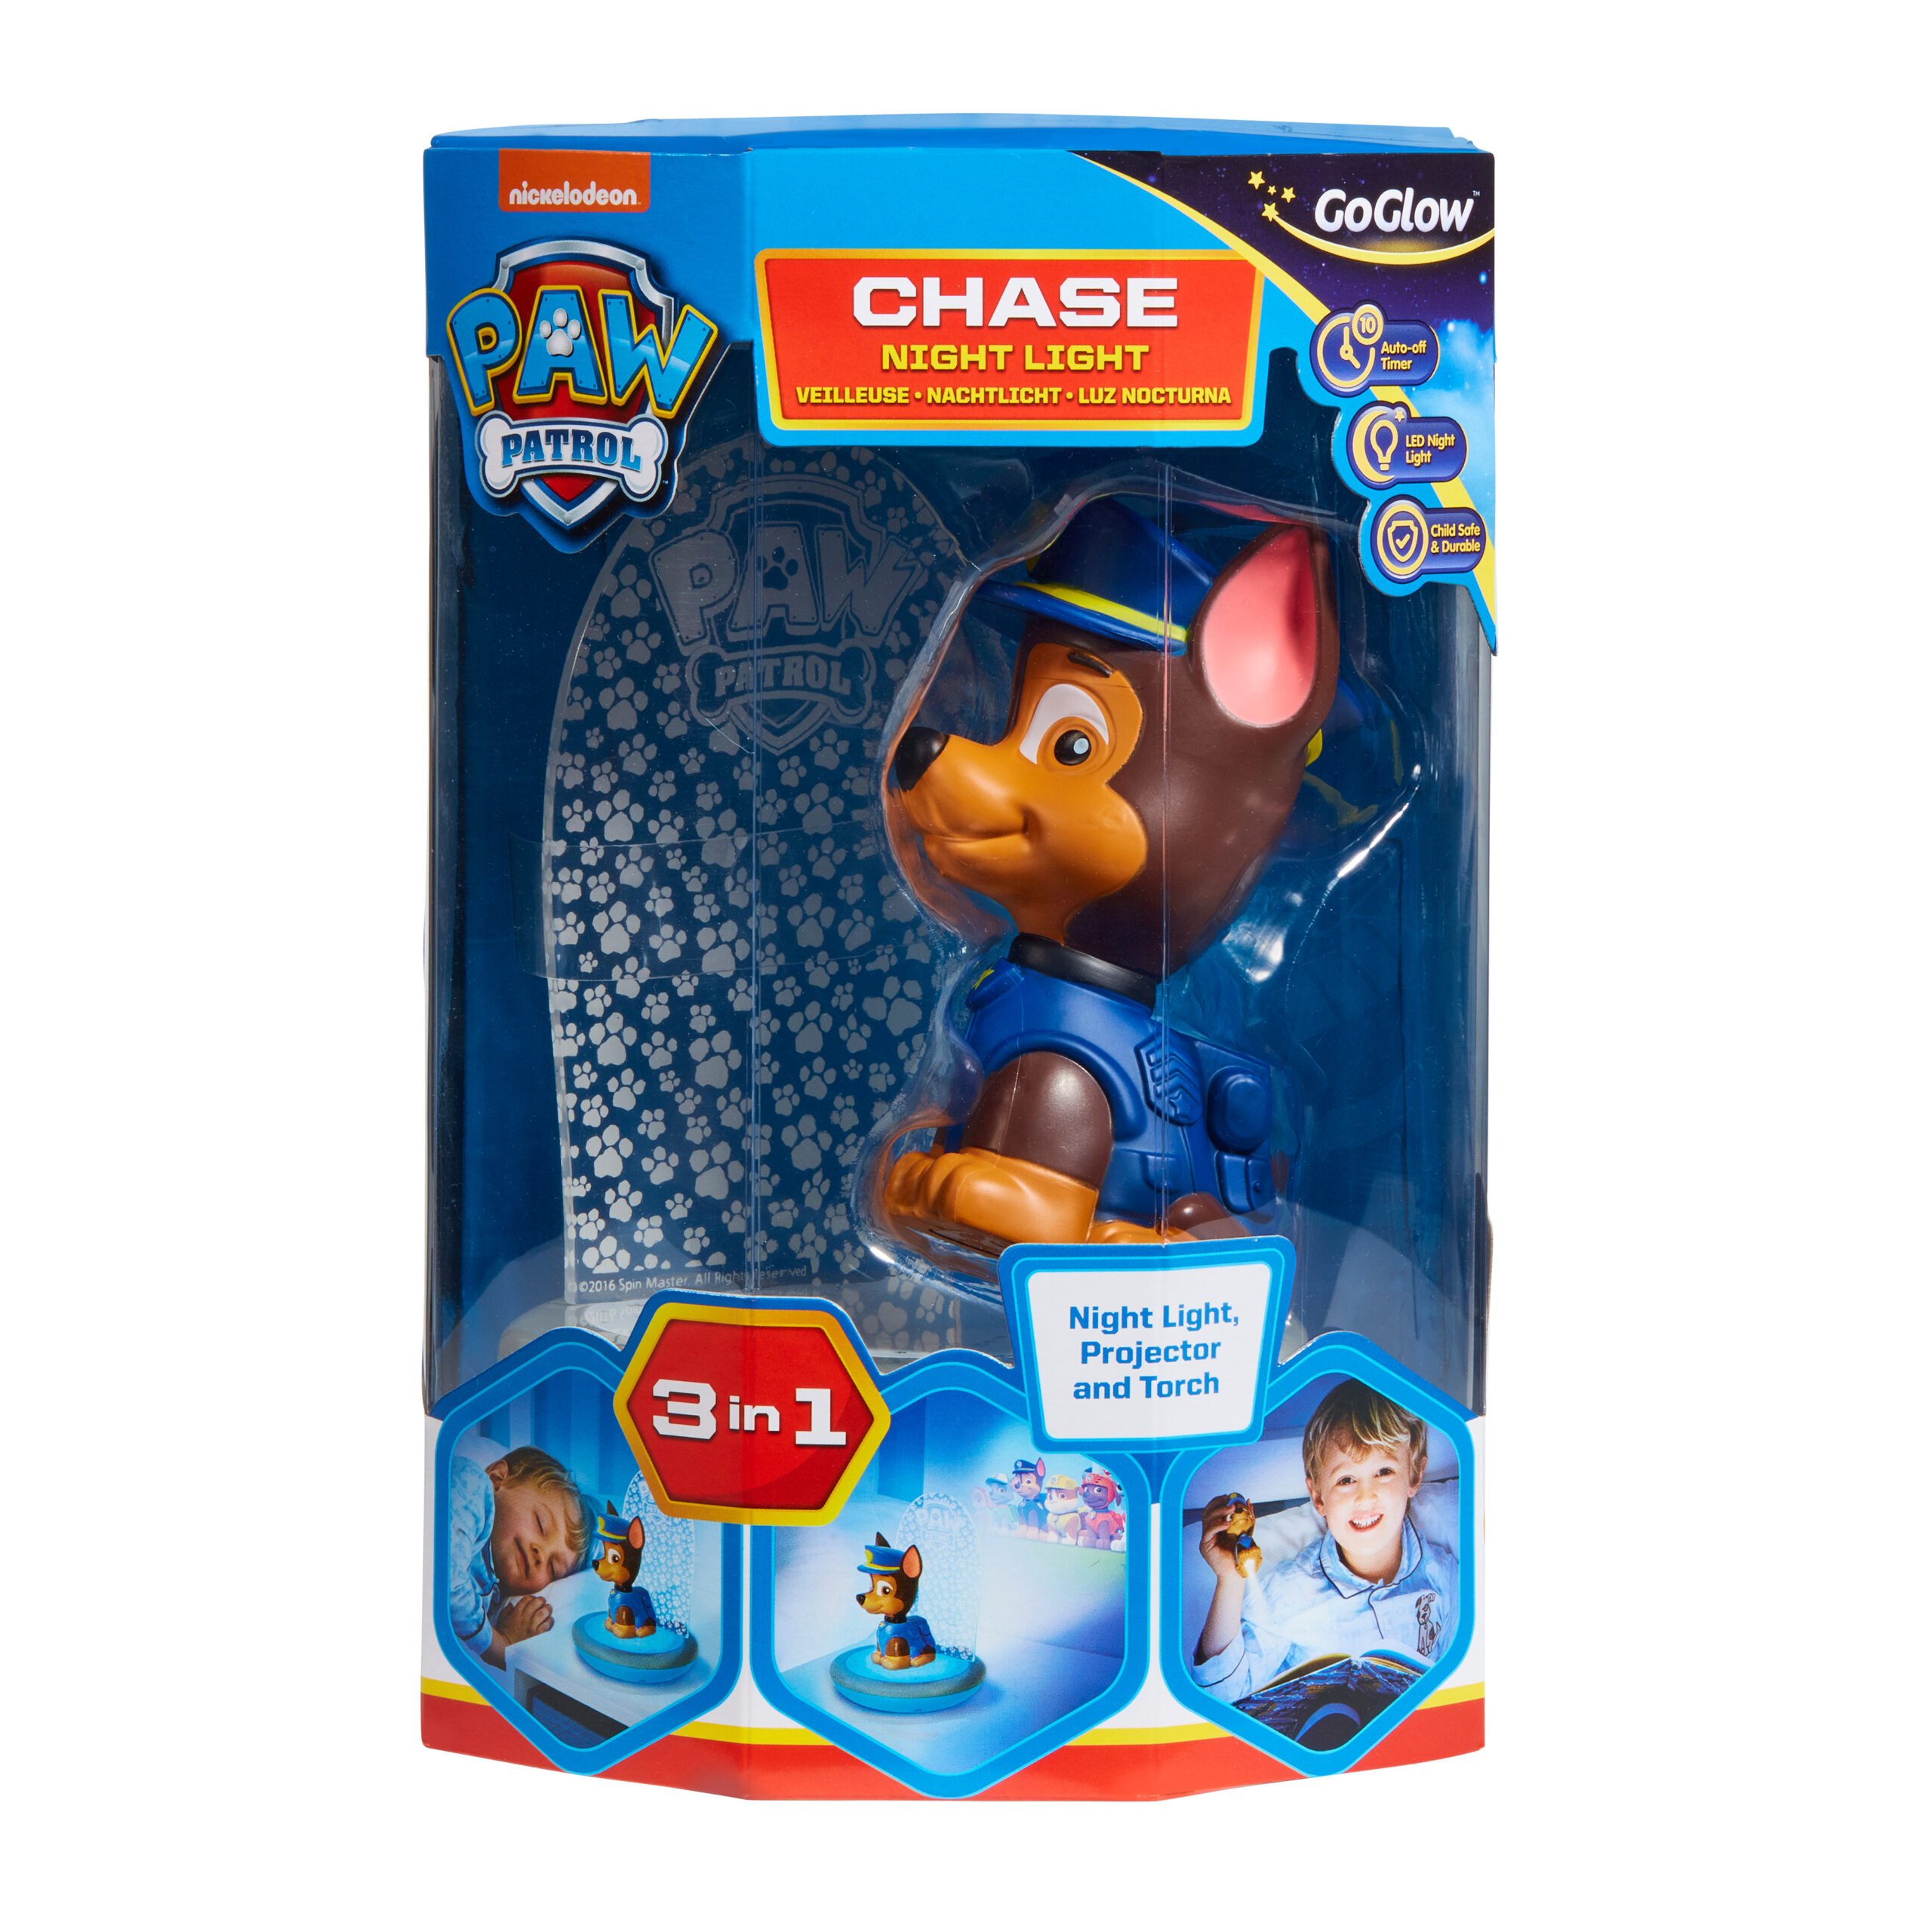 Paw Patrol - Chase Kids Magic Bedside Night Light, Torch and Projector (10043)